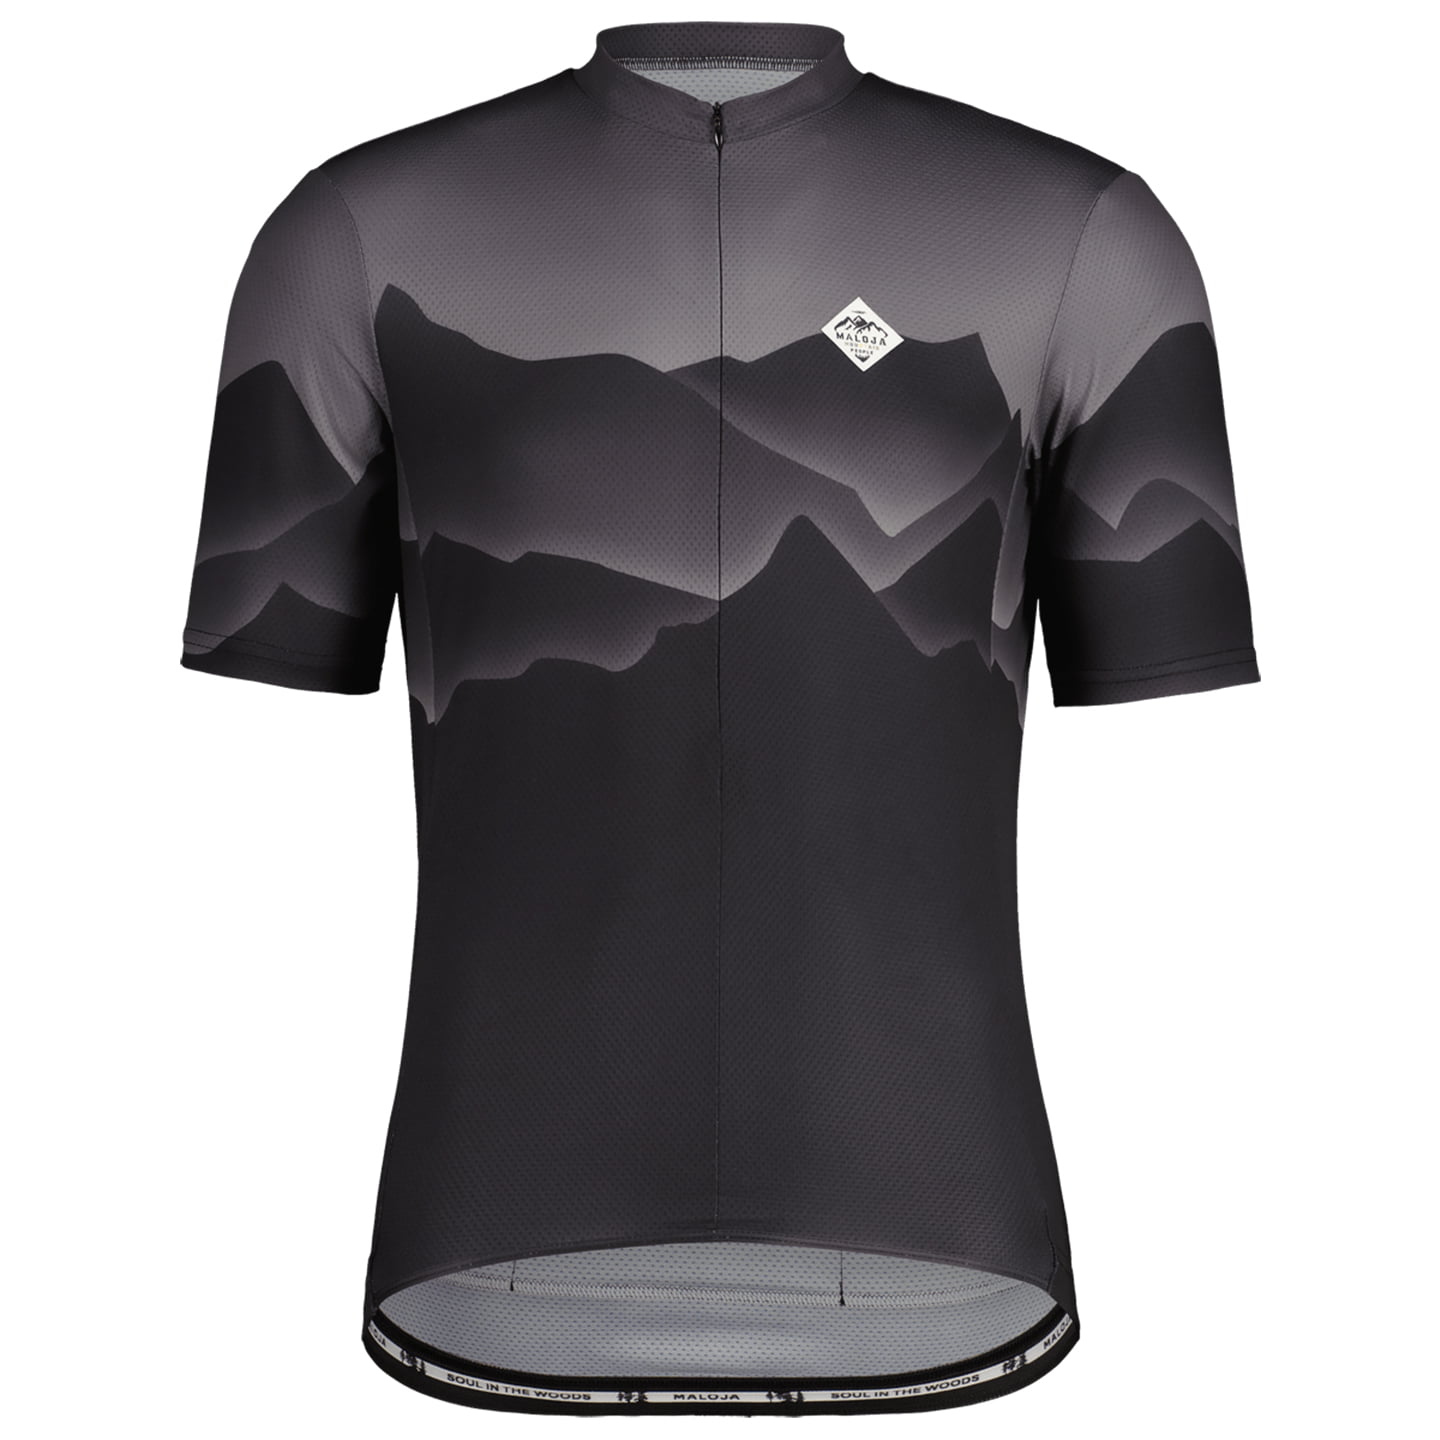 MALOJA ChandolinM. Short Sleeve Jersey Short Sleeve Jersey, for men, size XL, Cycling jersey, Cycle clothing